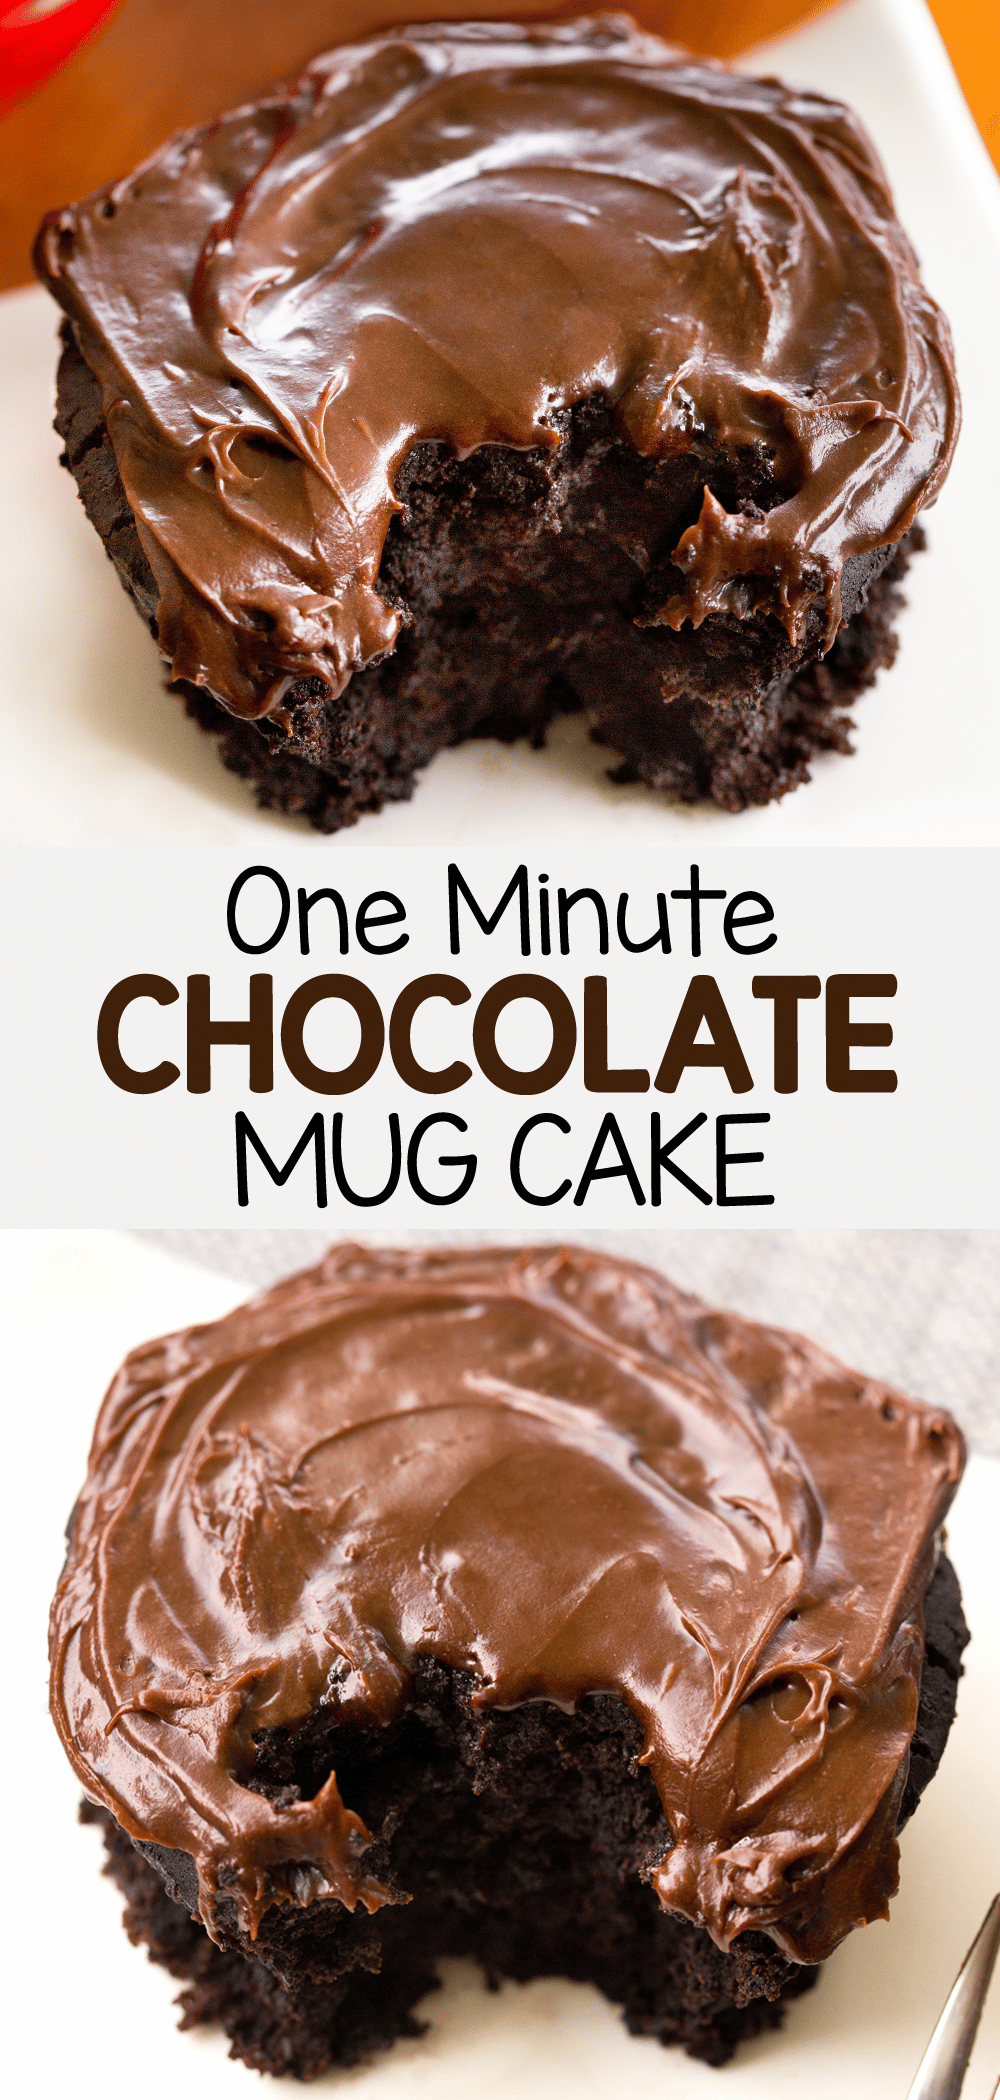 https://chocolatecoveredkatie.com/wp-content/uploads/2011/11/How-To-Make-The-Best-Chocolate-Mug-Cake-Recipe.png